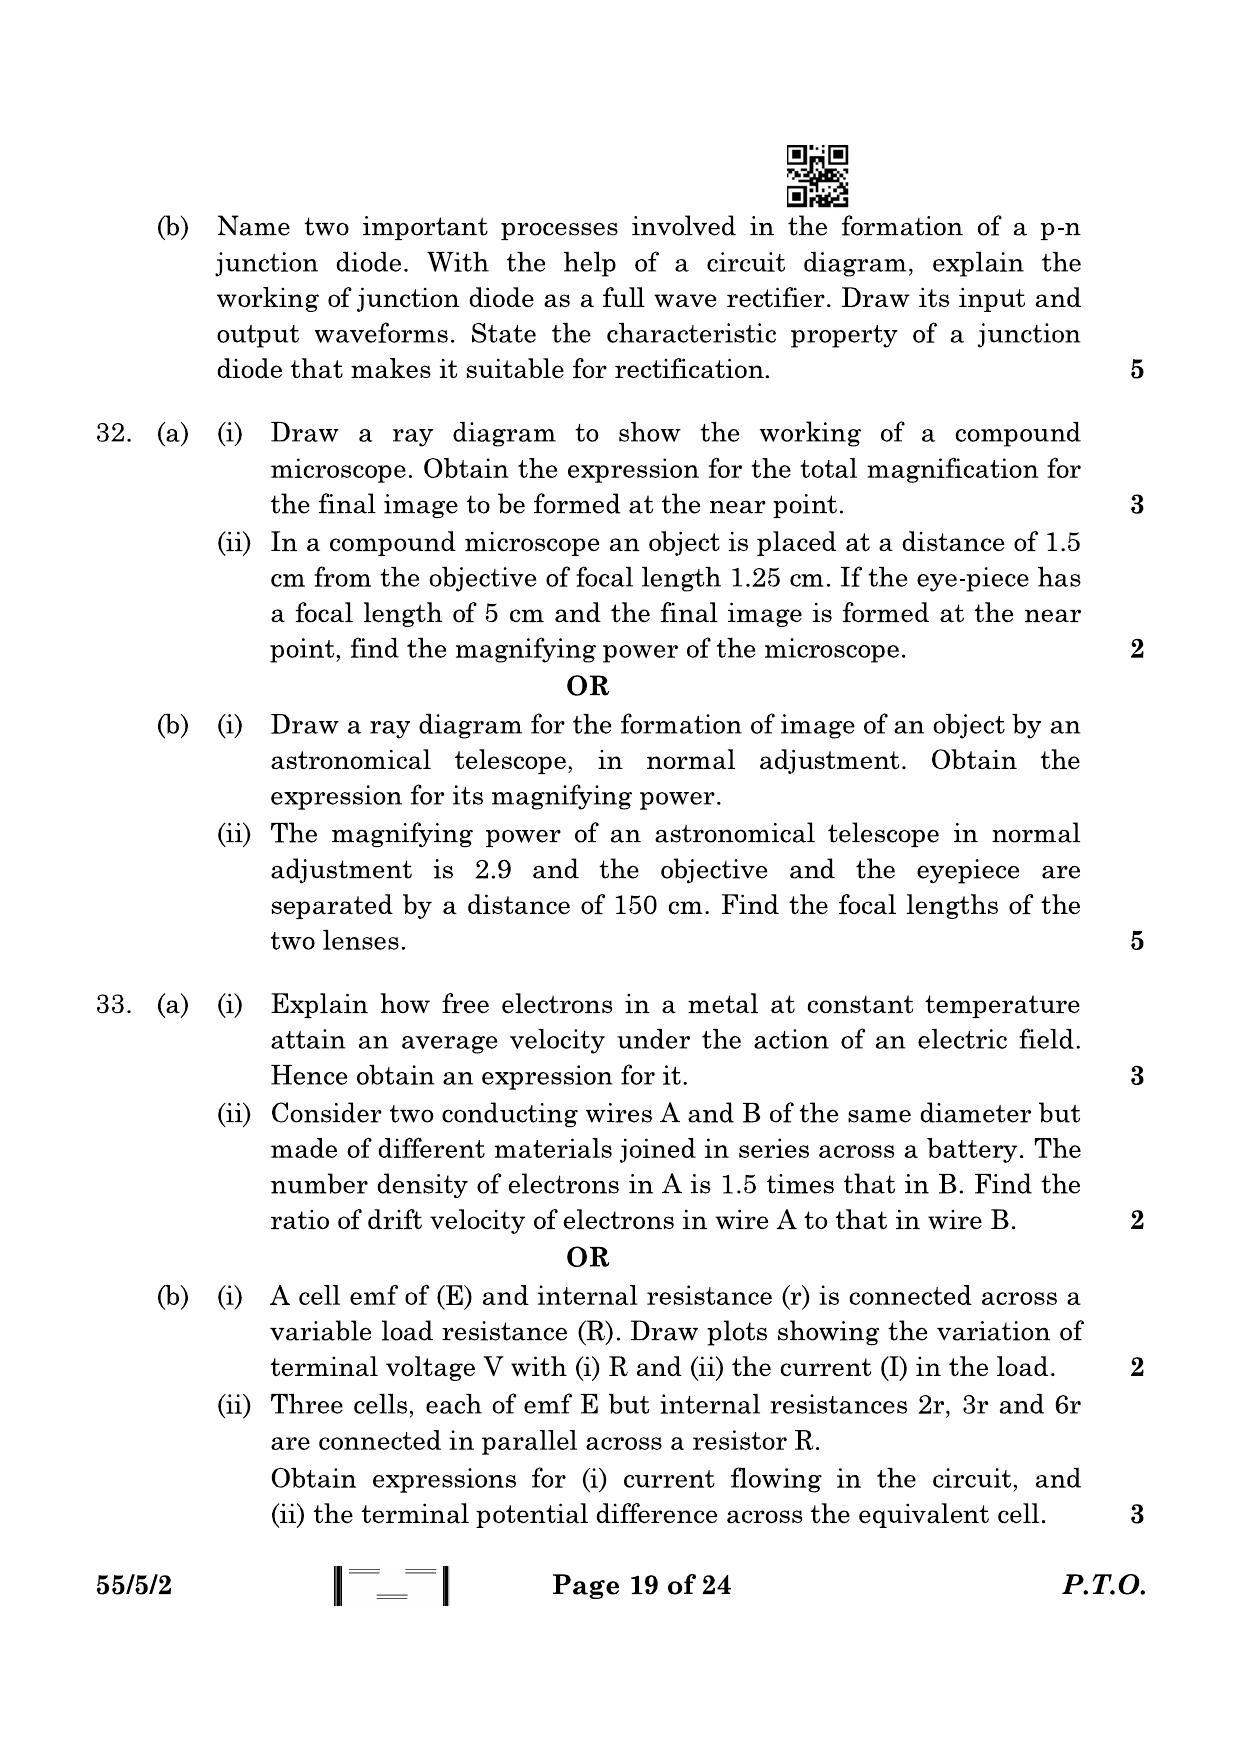 CBSE Class 12 55-5-2 Physics 2023 Question Paper - Page 19